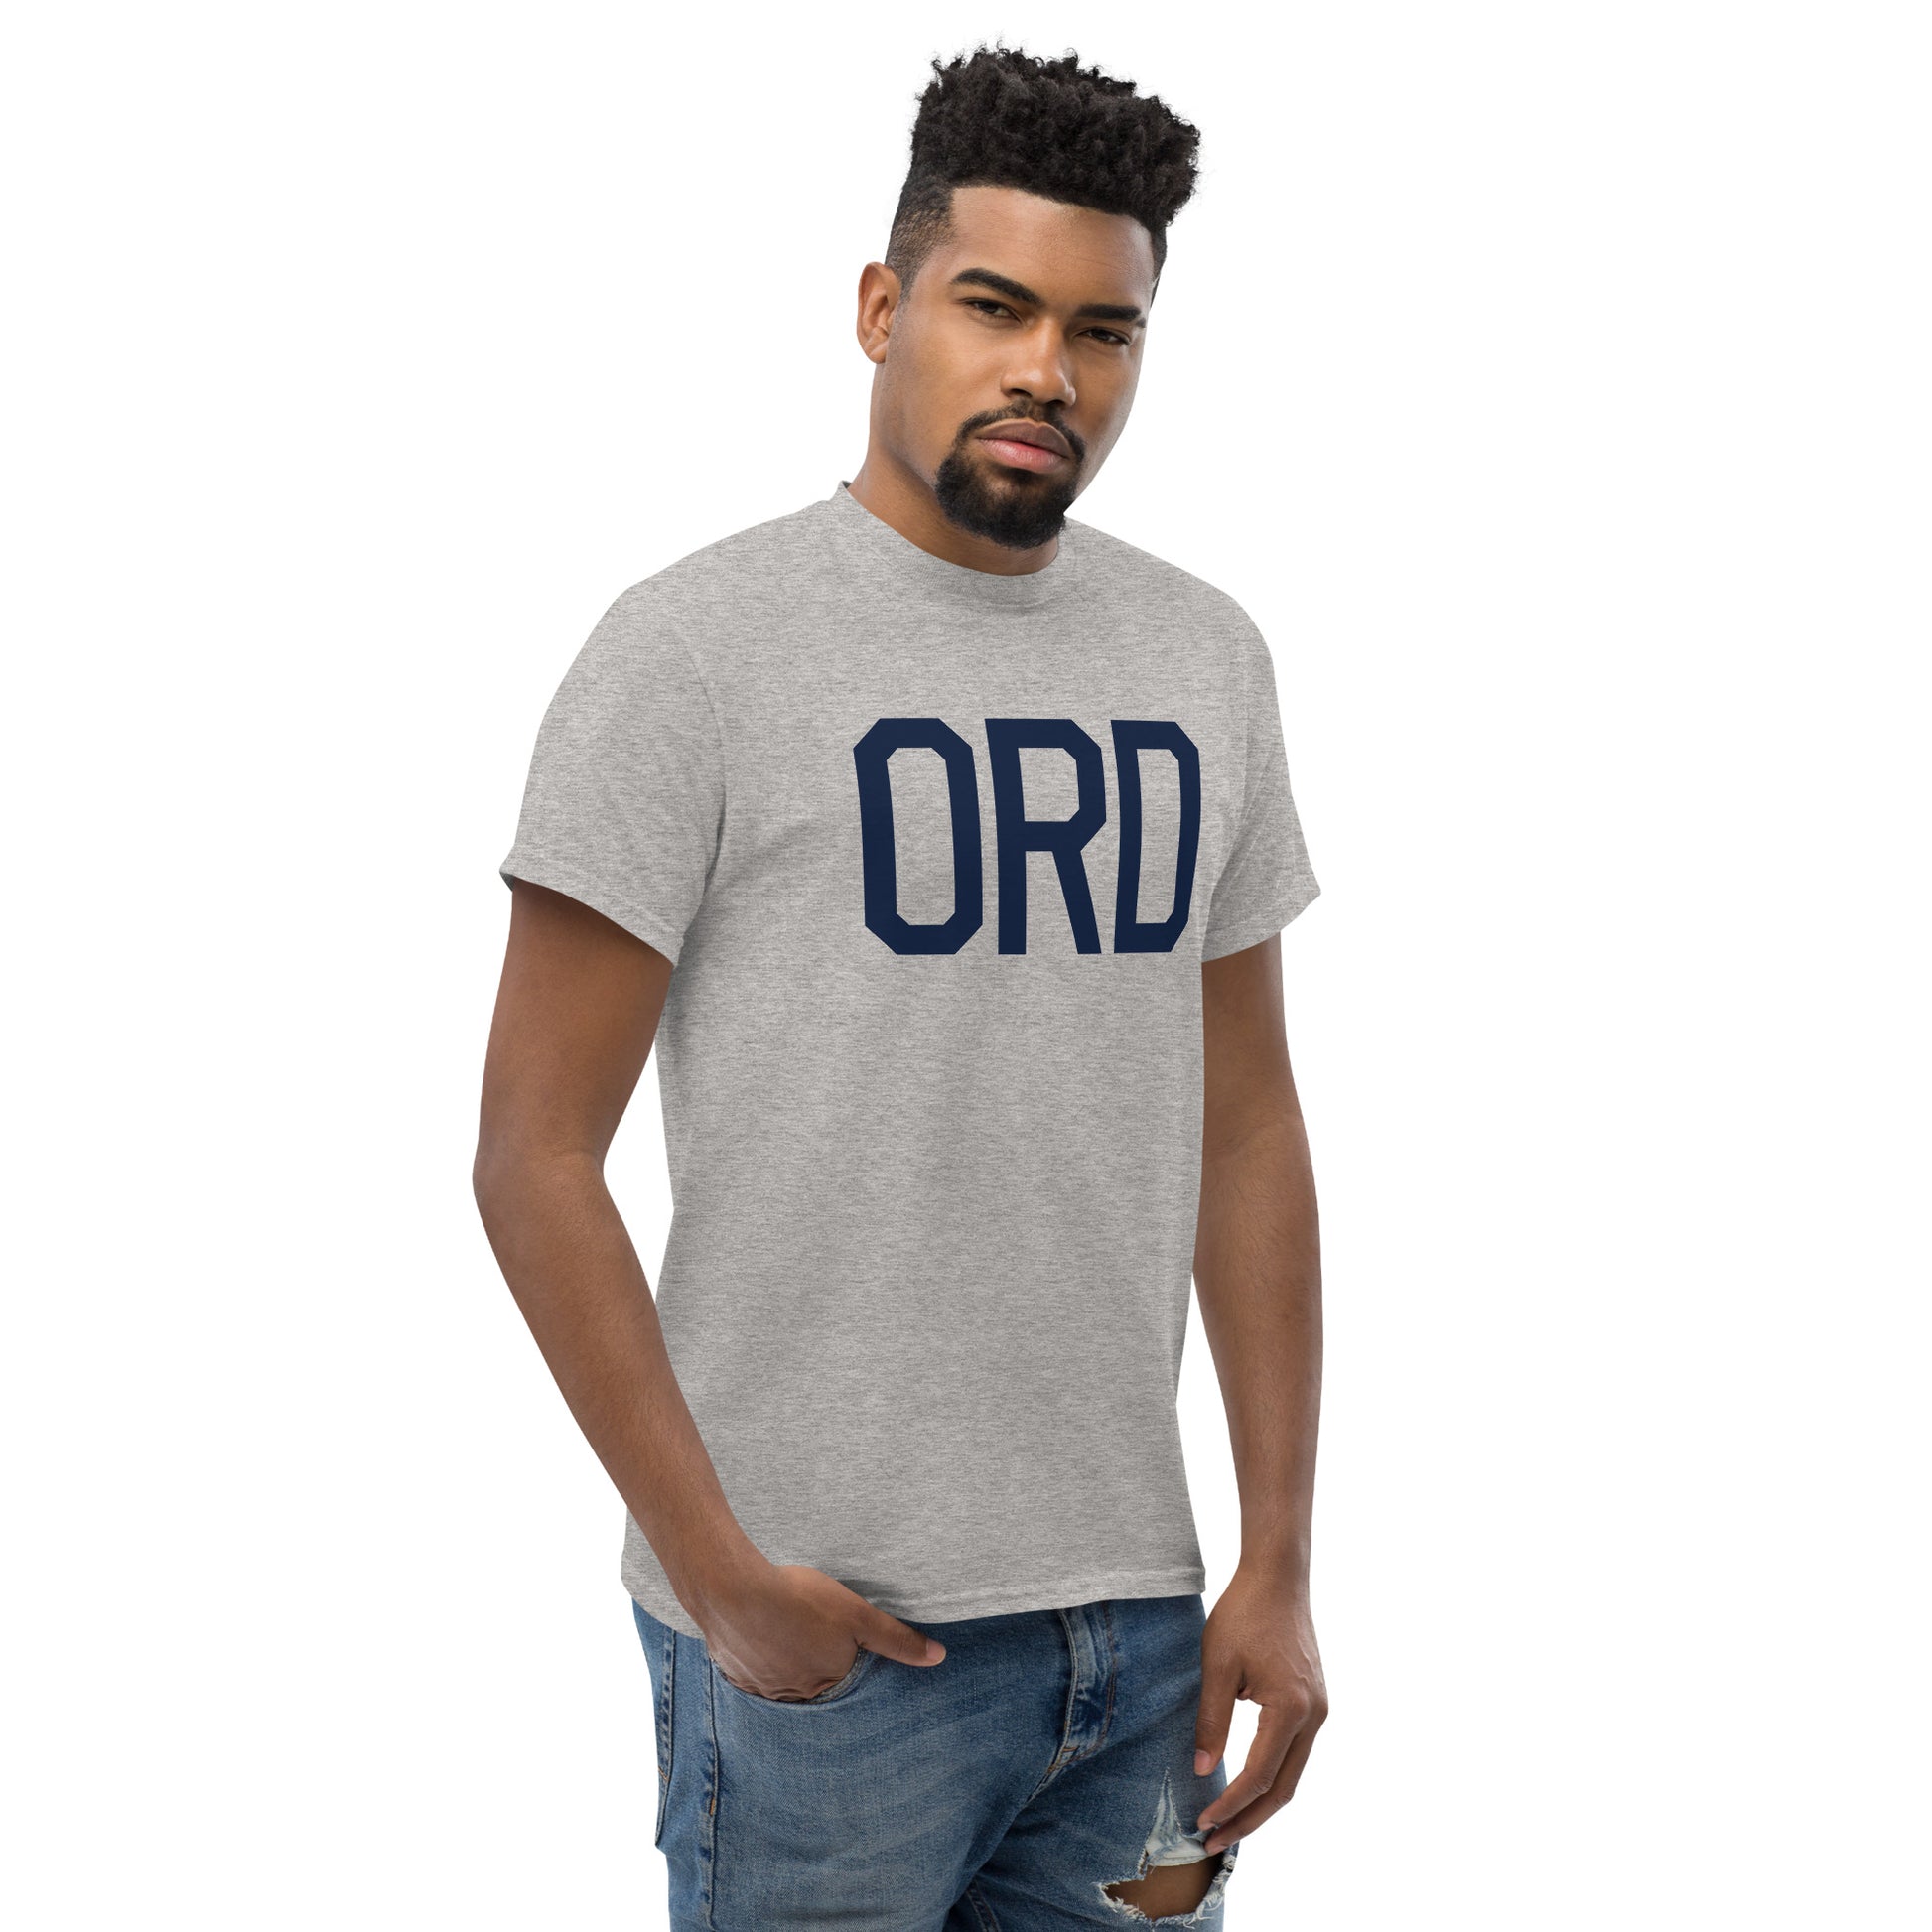 Aviation-Theme Men's T-Shirt - Navy Blue Graphic • ORD Chicago • YHM Designs - Image 08